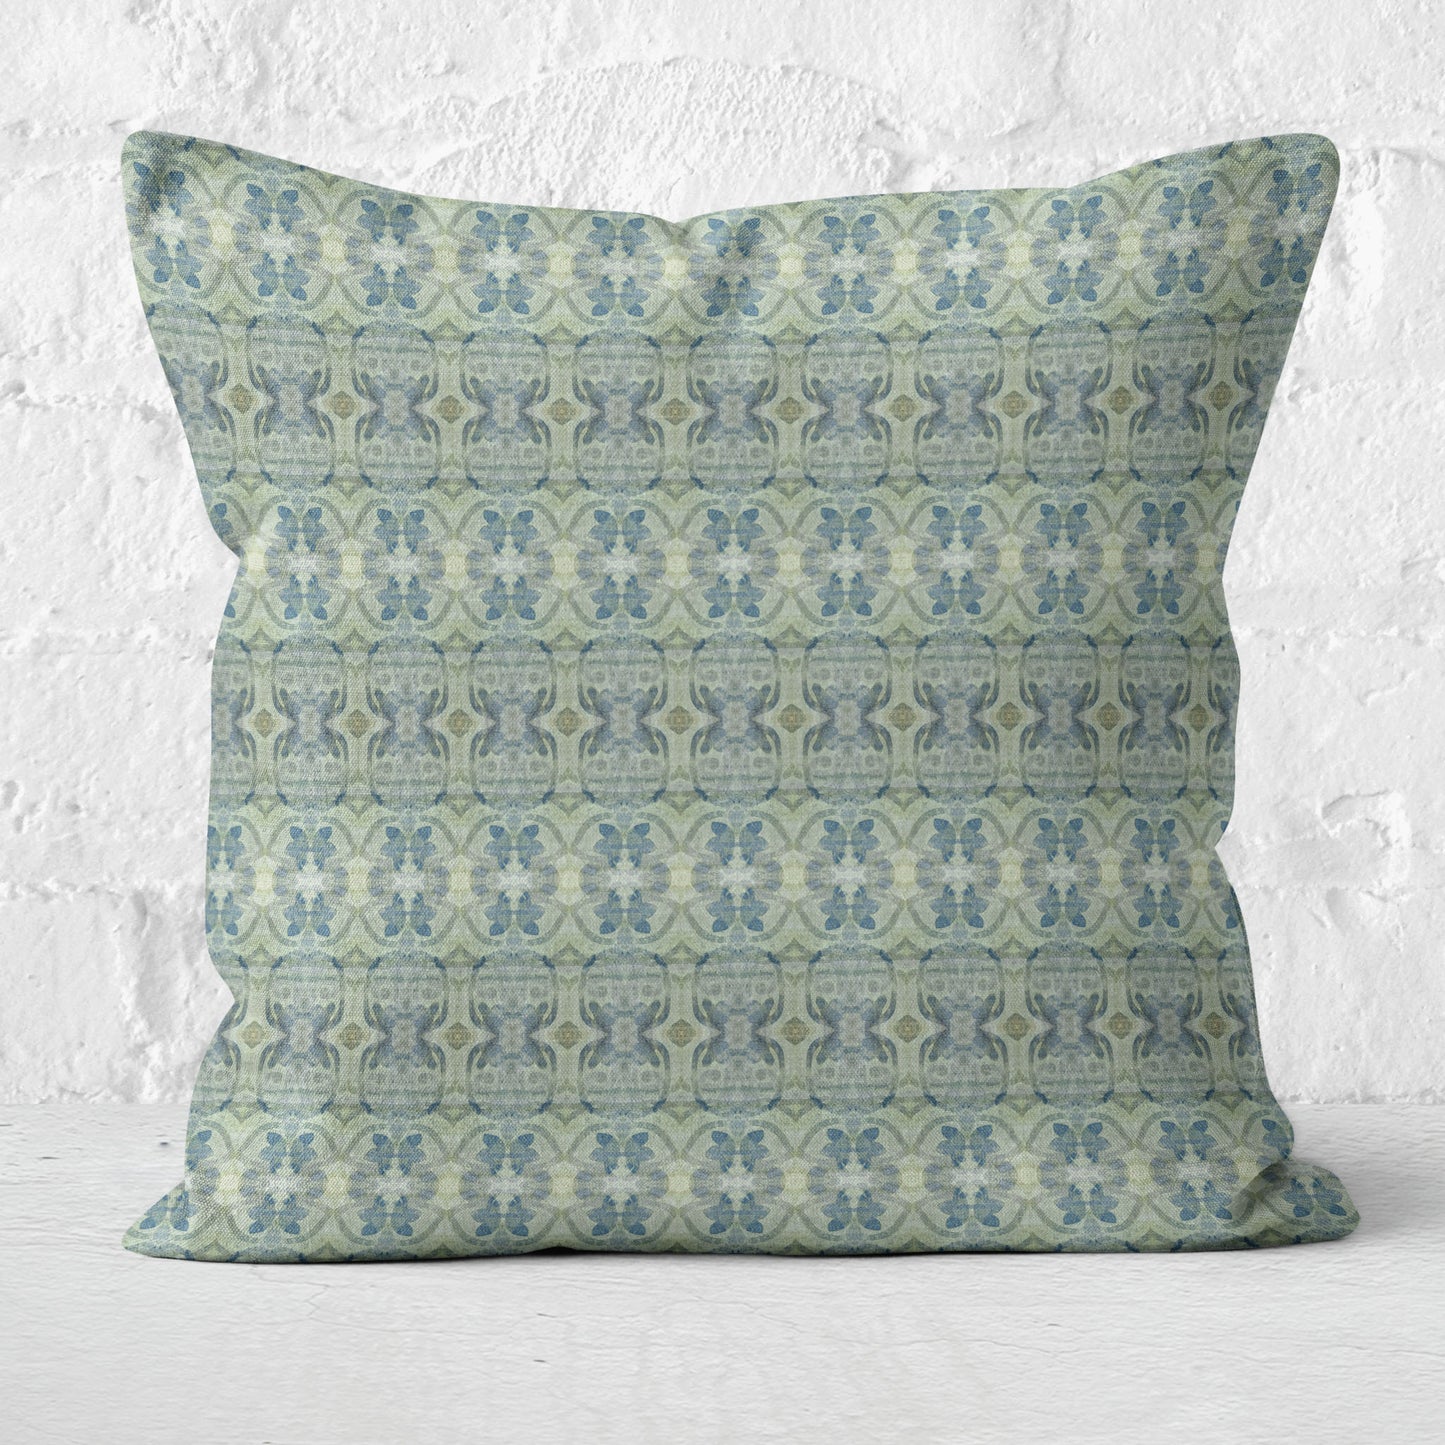 Square throw pillow featuring a blue and green abstract floral pattern sitting against a white brick wall